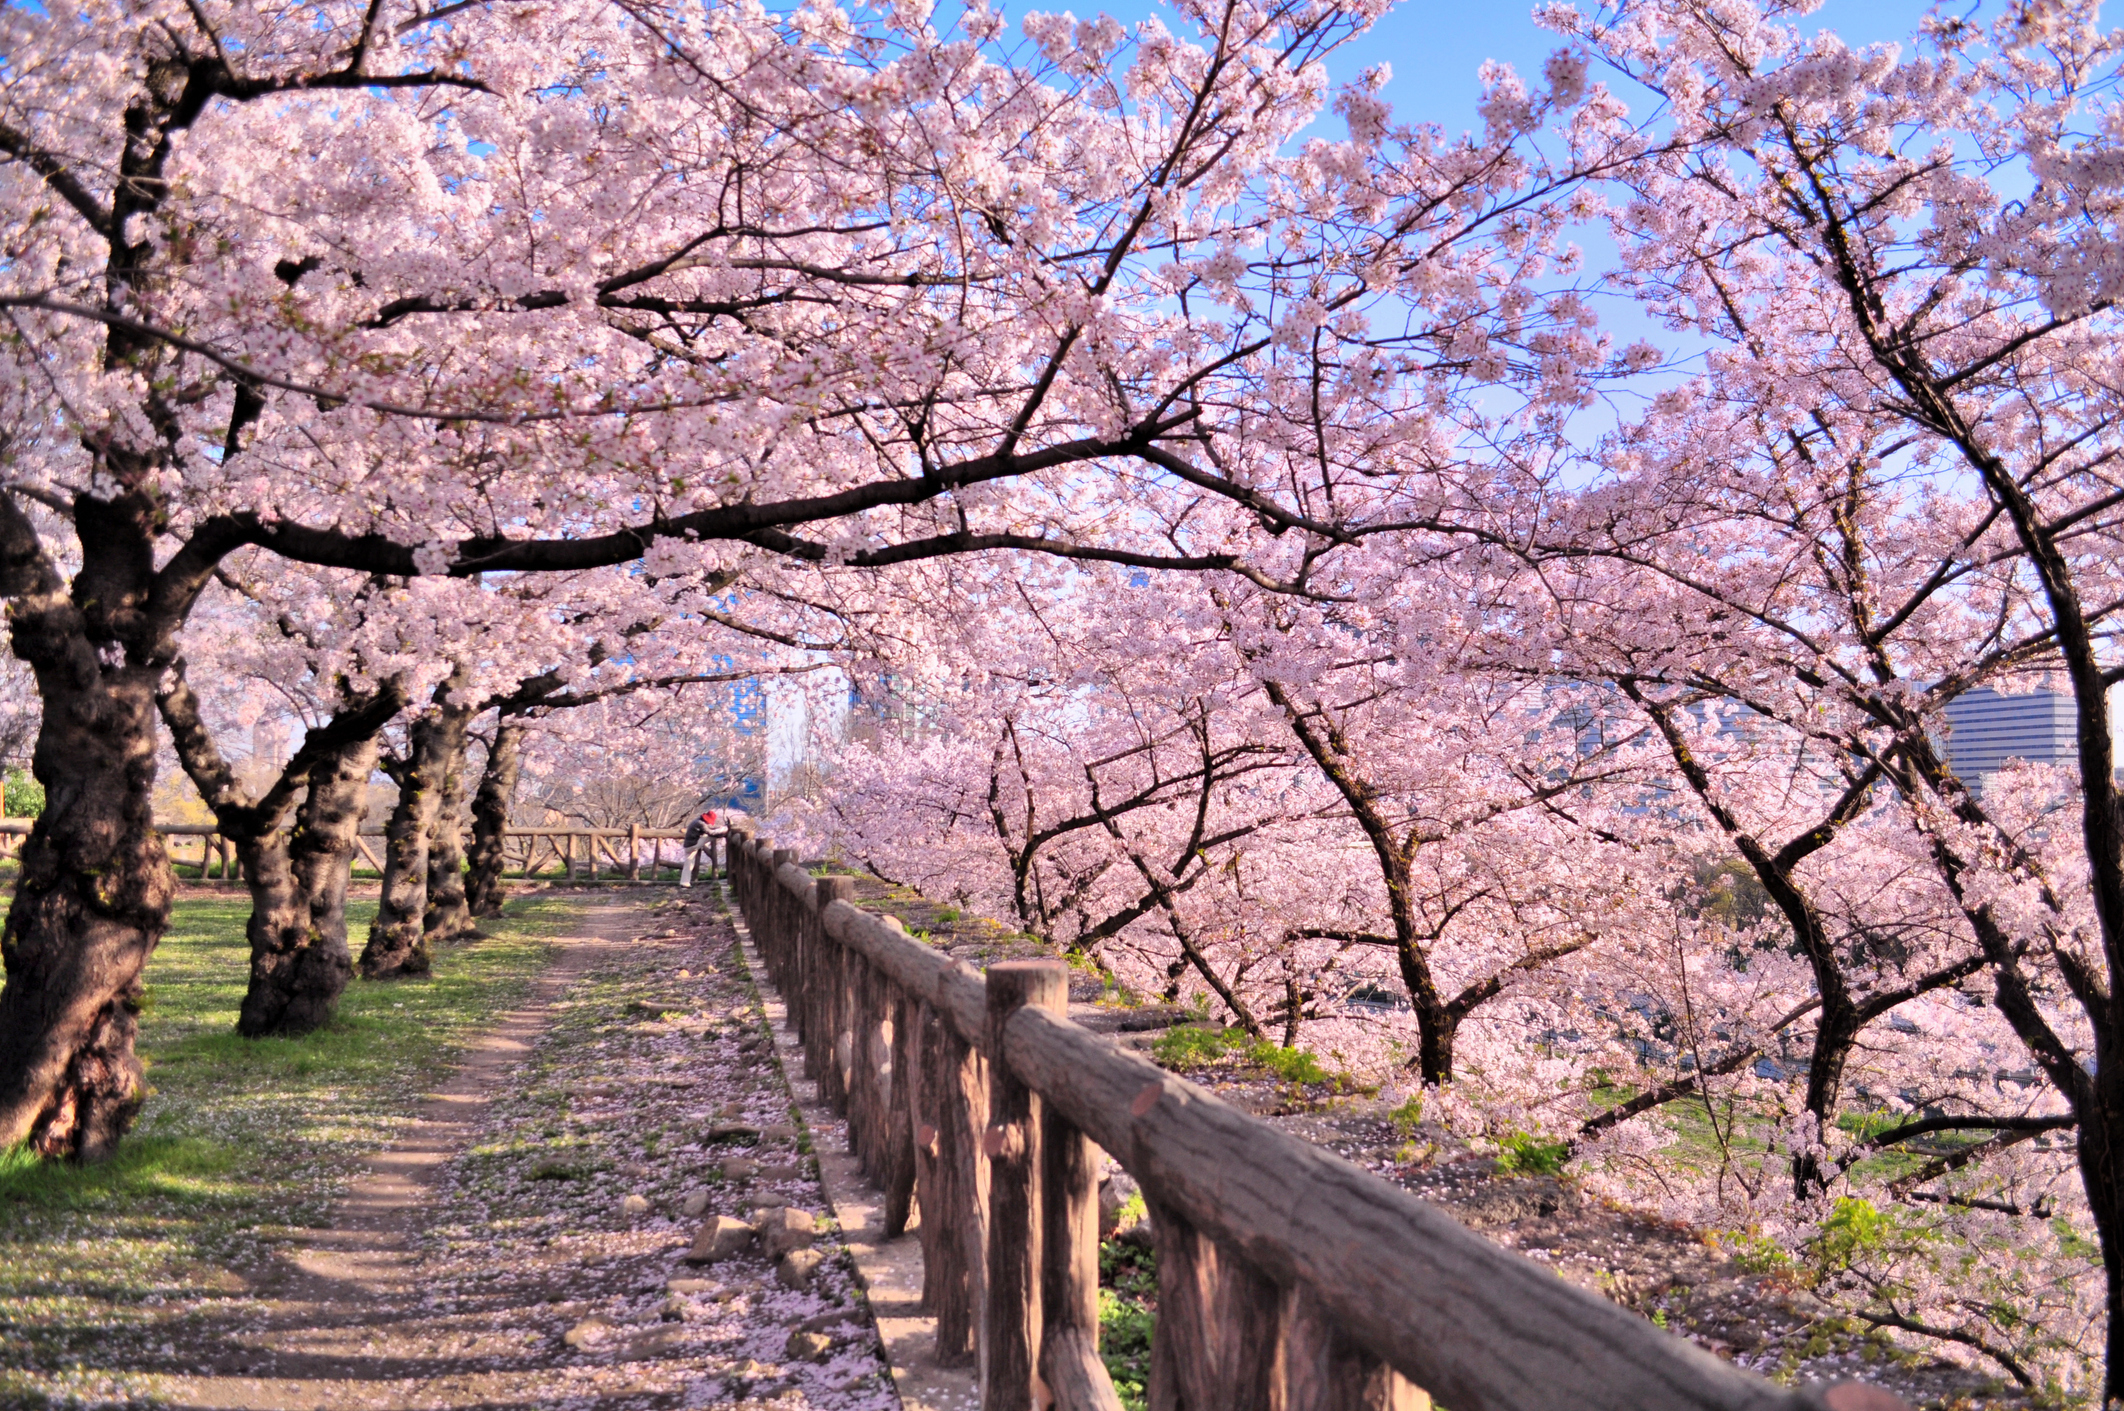 Cherry blossoms at a park in Osaka (photo: onosan, iStock license)